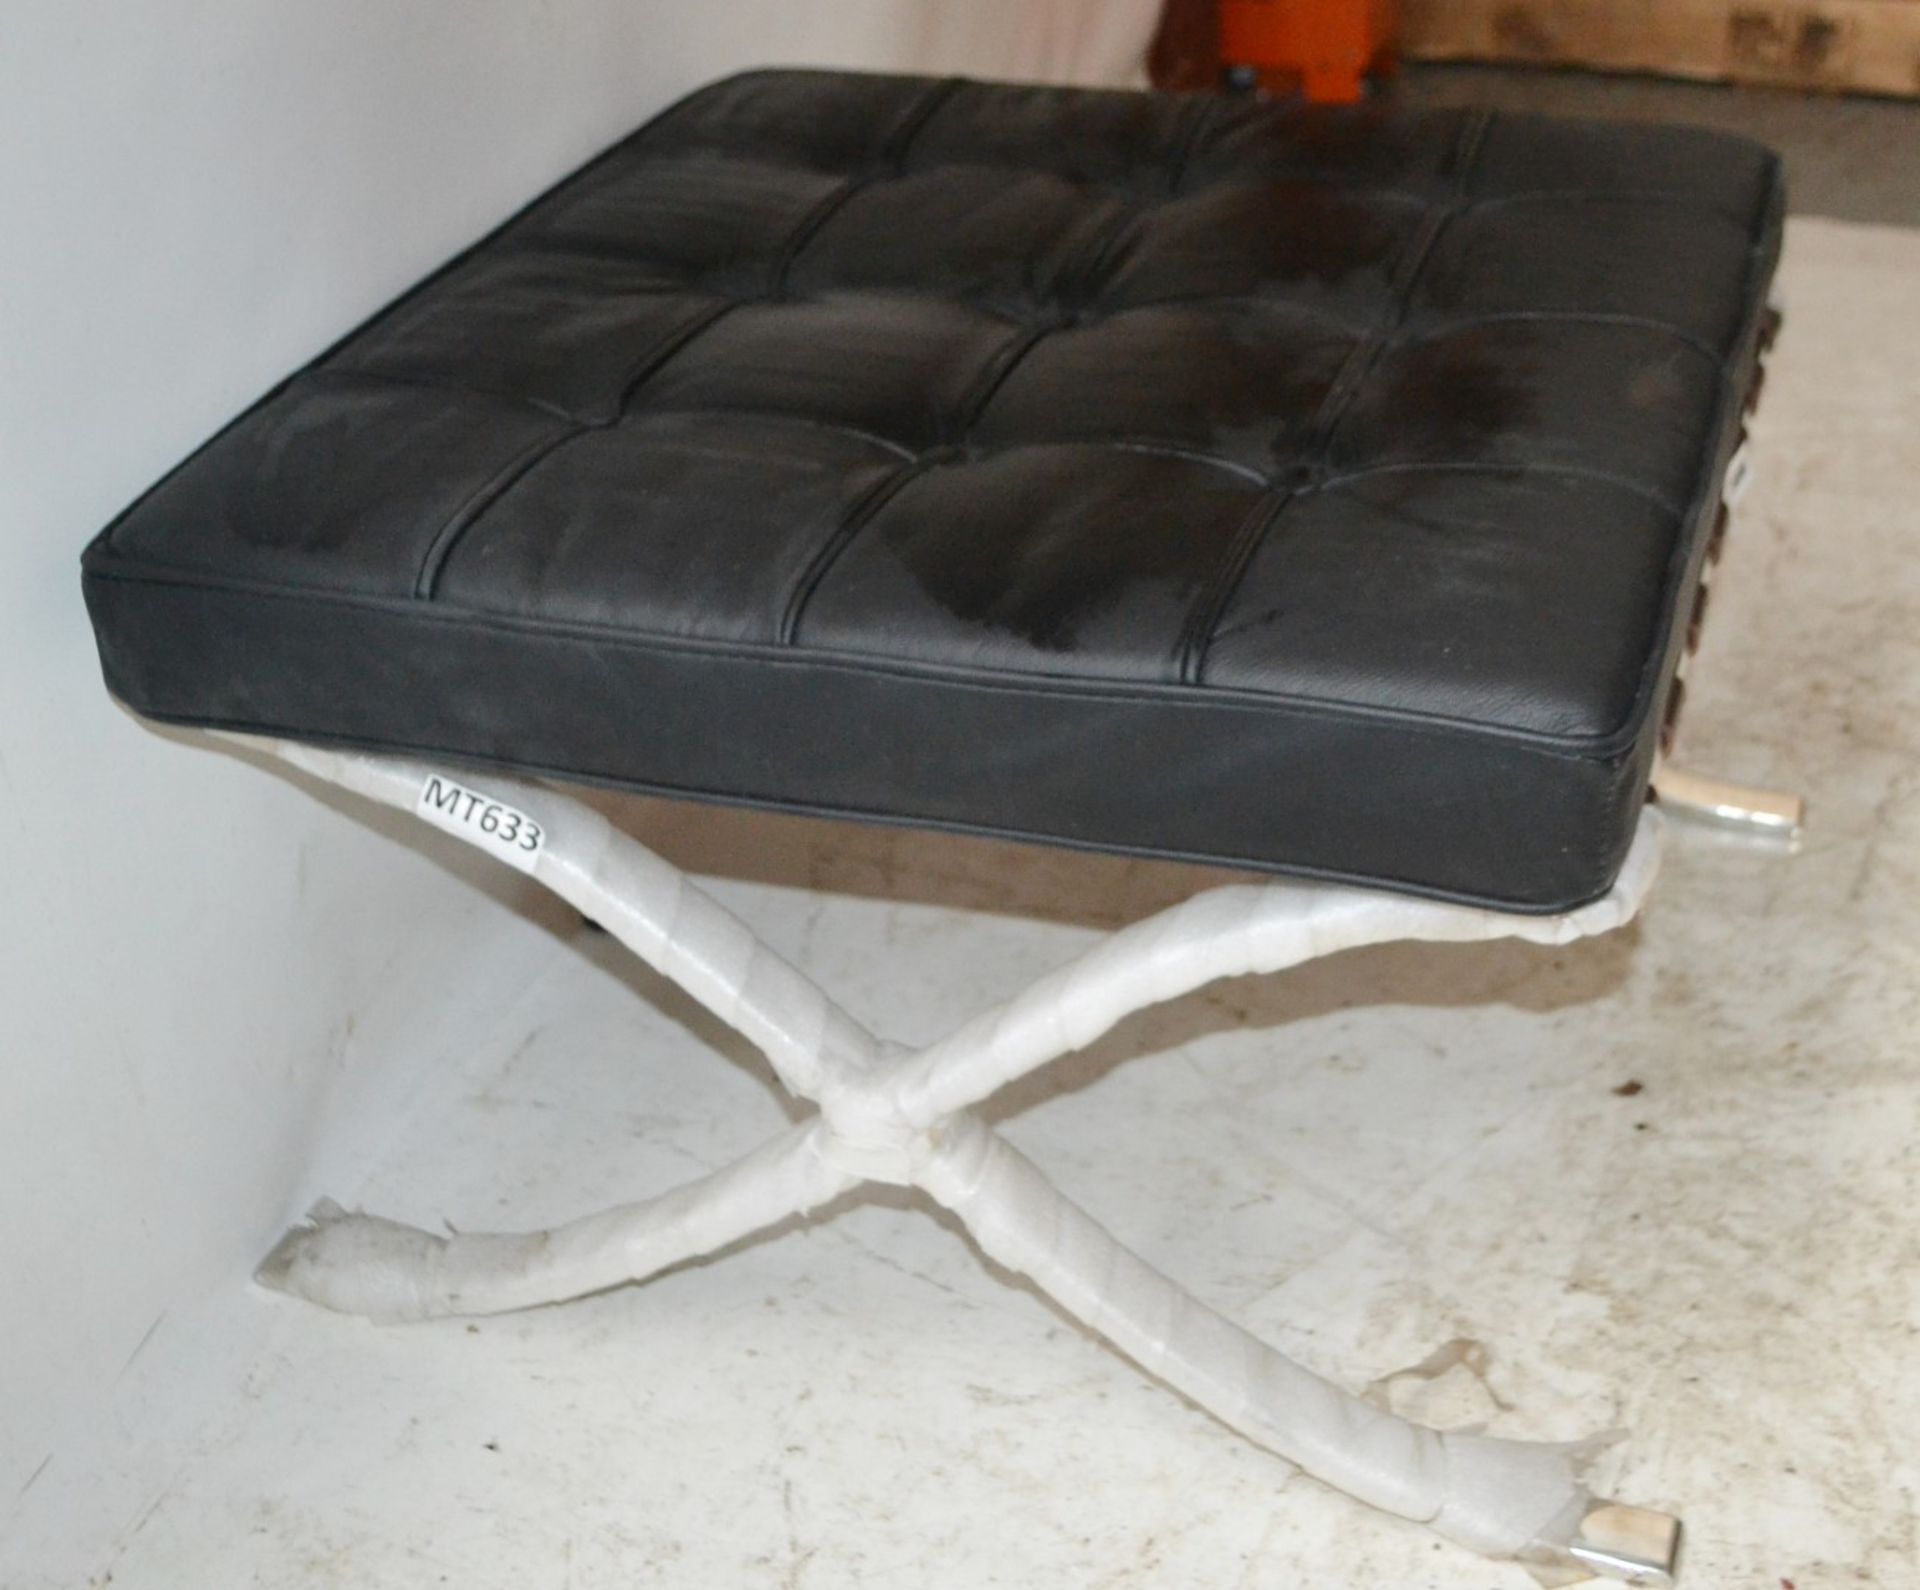 1 x Black Leather Square Foot Stool With Stainless Steel Cross Legs - Ref: BLT388 - Location: WA14 - Image 2 of 4